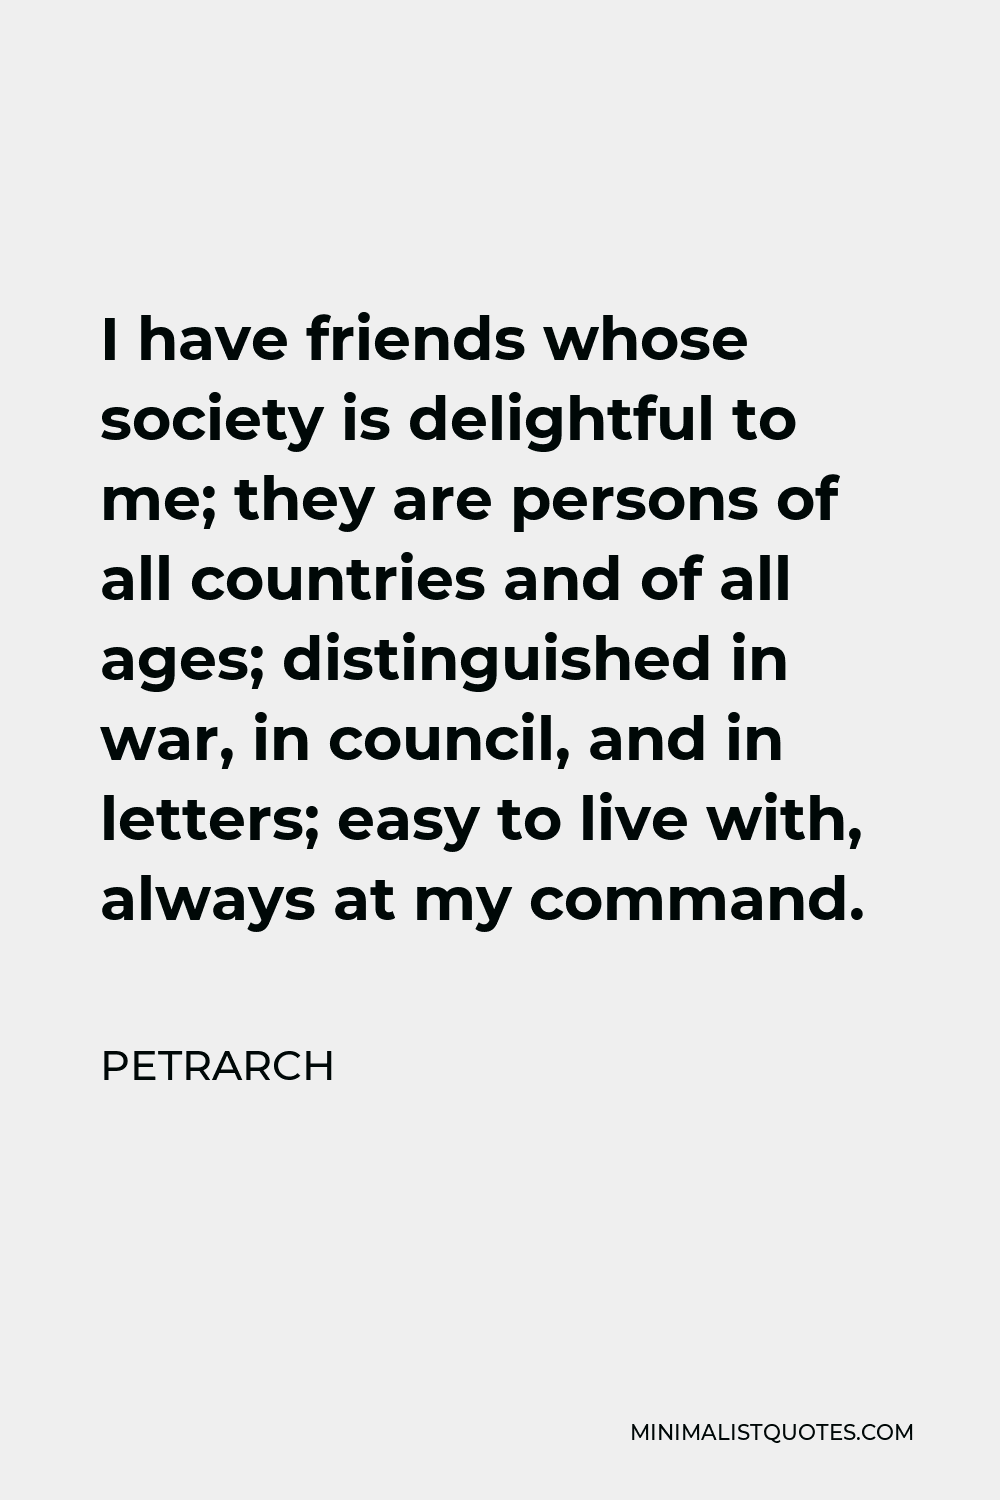 Petrarch Quote - I have friends whose society is delightful to me; they are persons of all countries and of all ages; distinguished in war, in council, and in letters; easy to live with, always at my command.